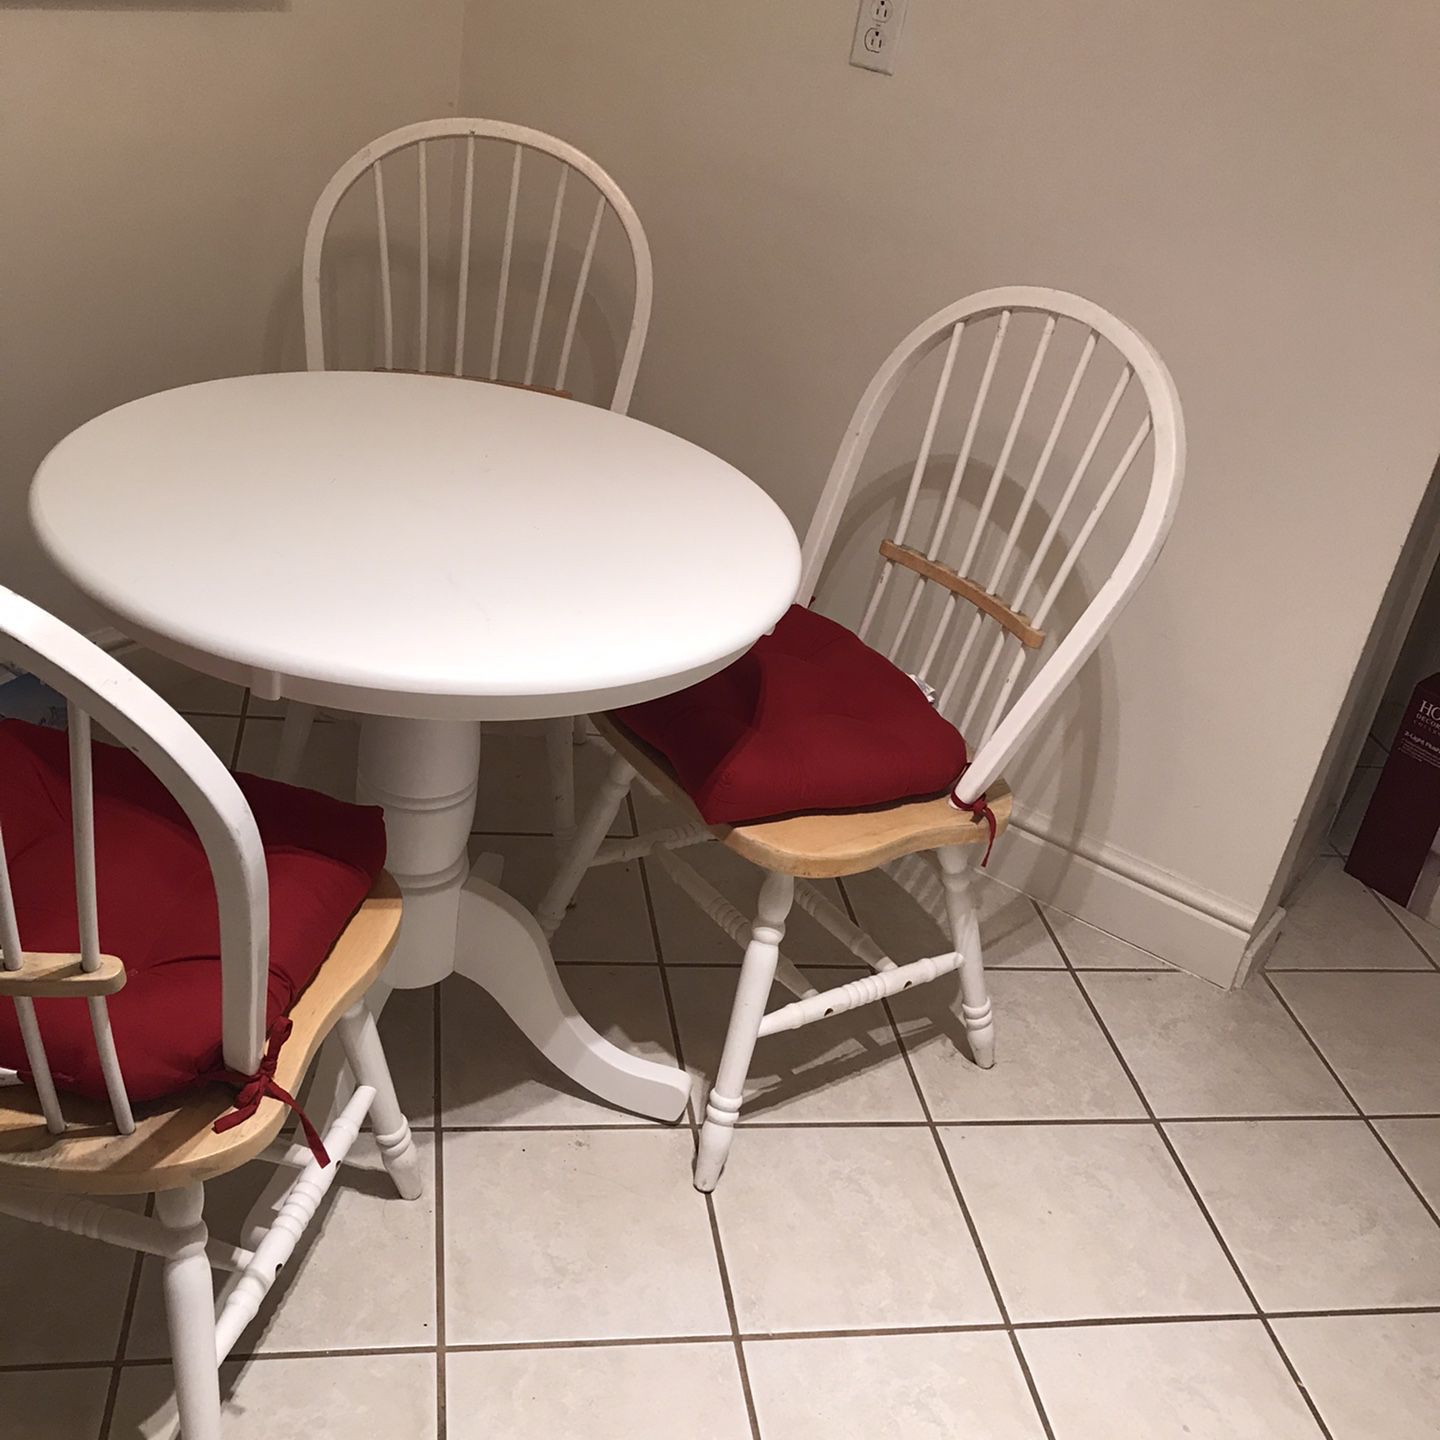 Kitchen Table With Free Chairs And Cushions